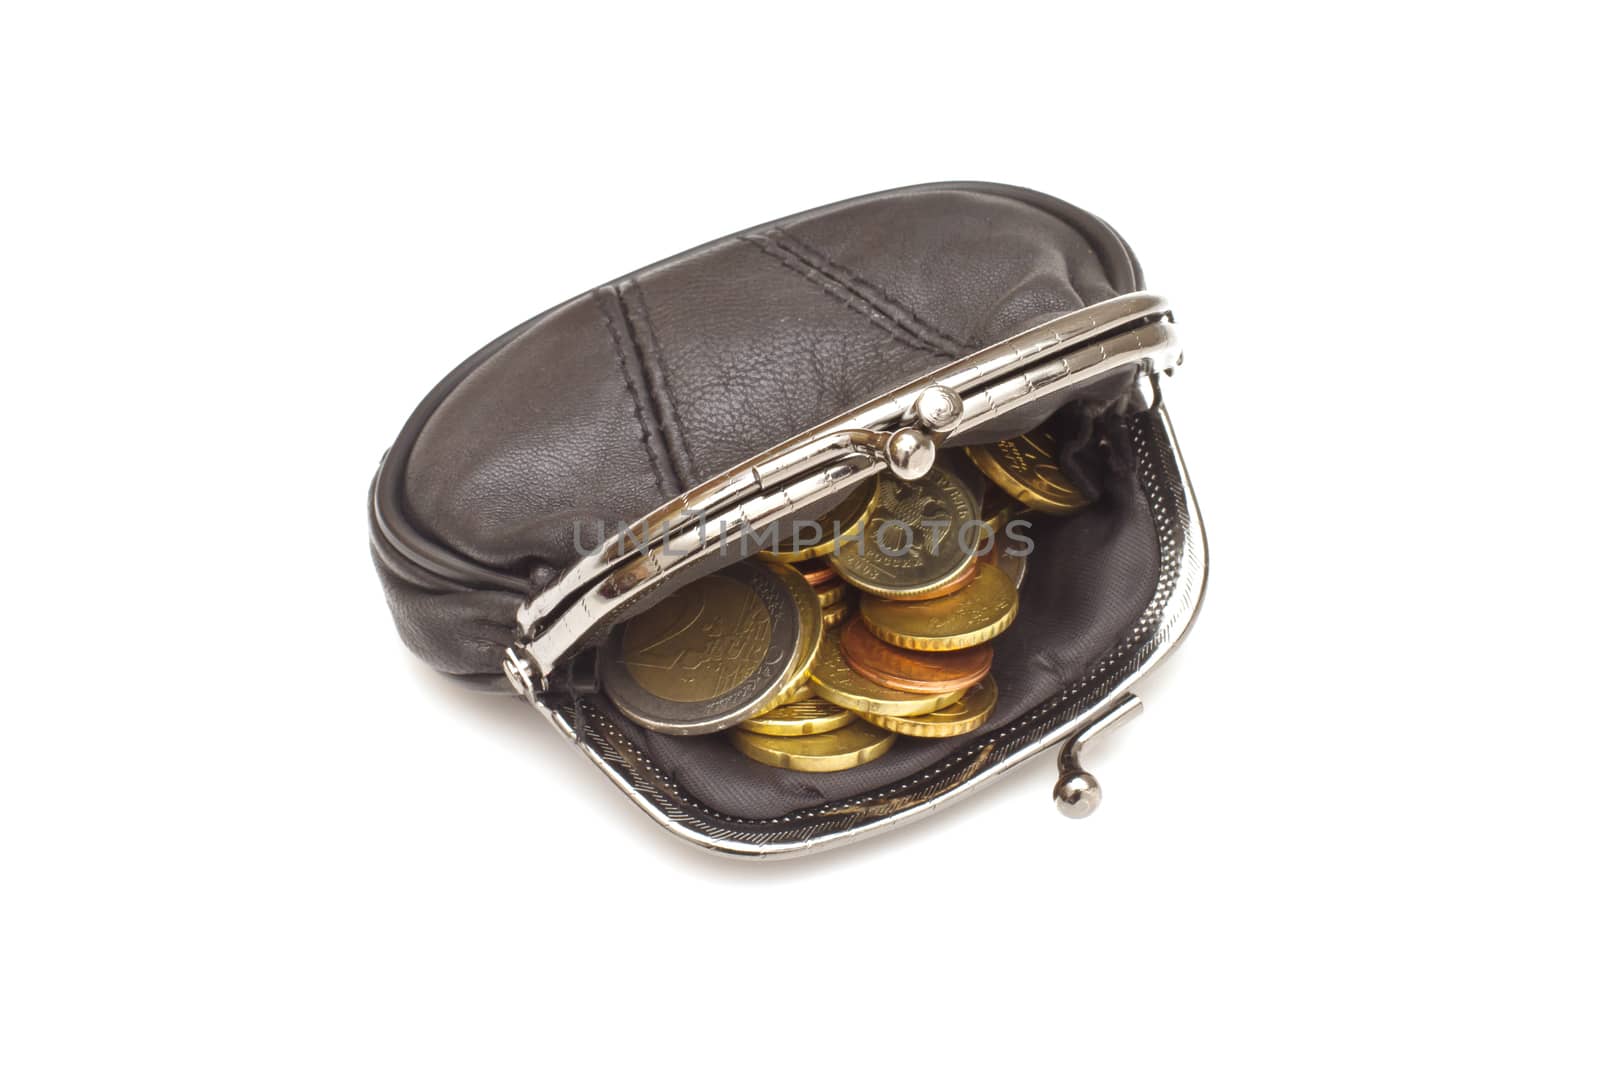 Black leather purse and several euro coins on white background by marslander